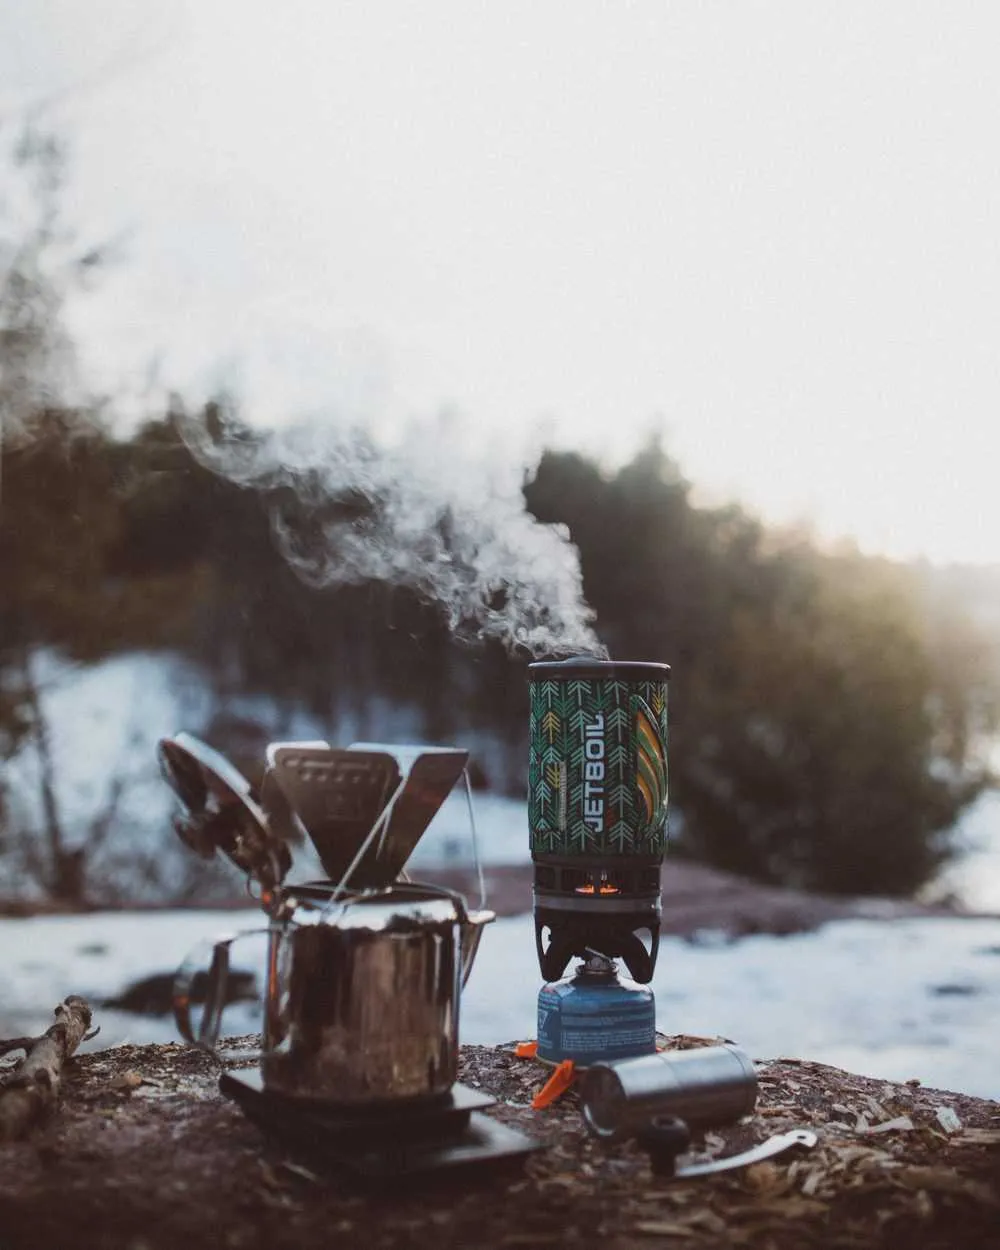 Camping Coffee Maker